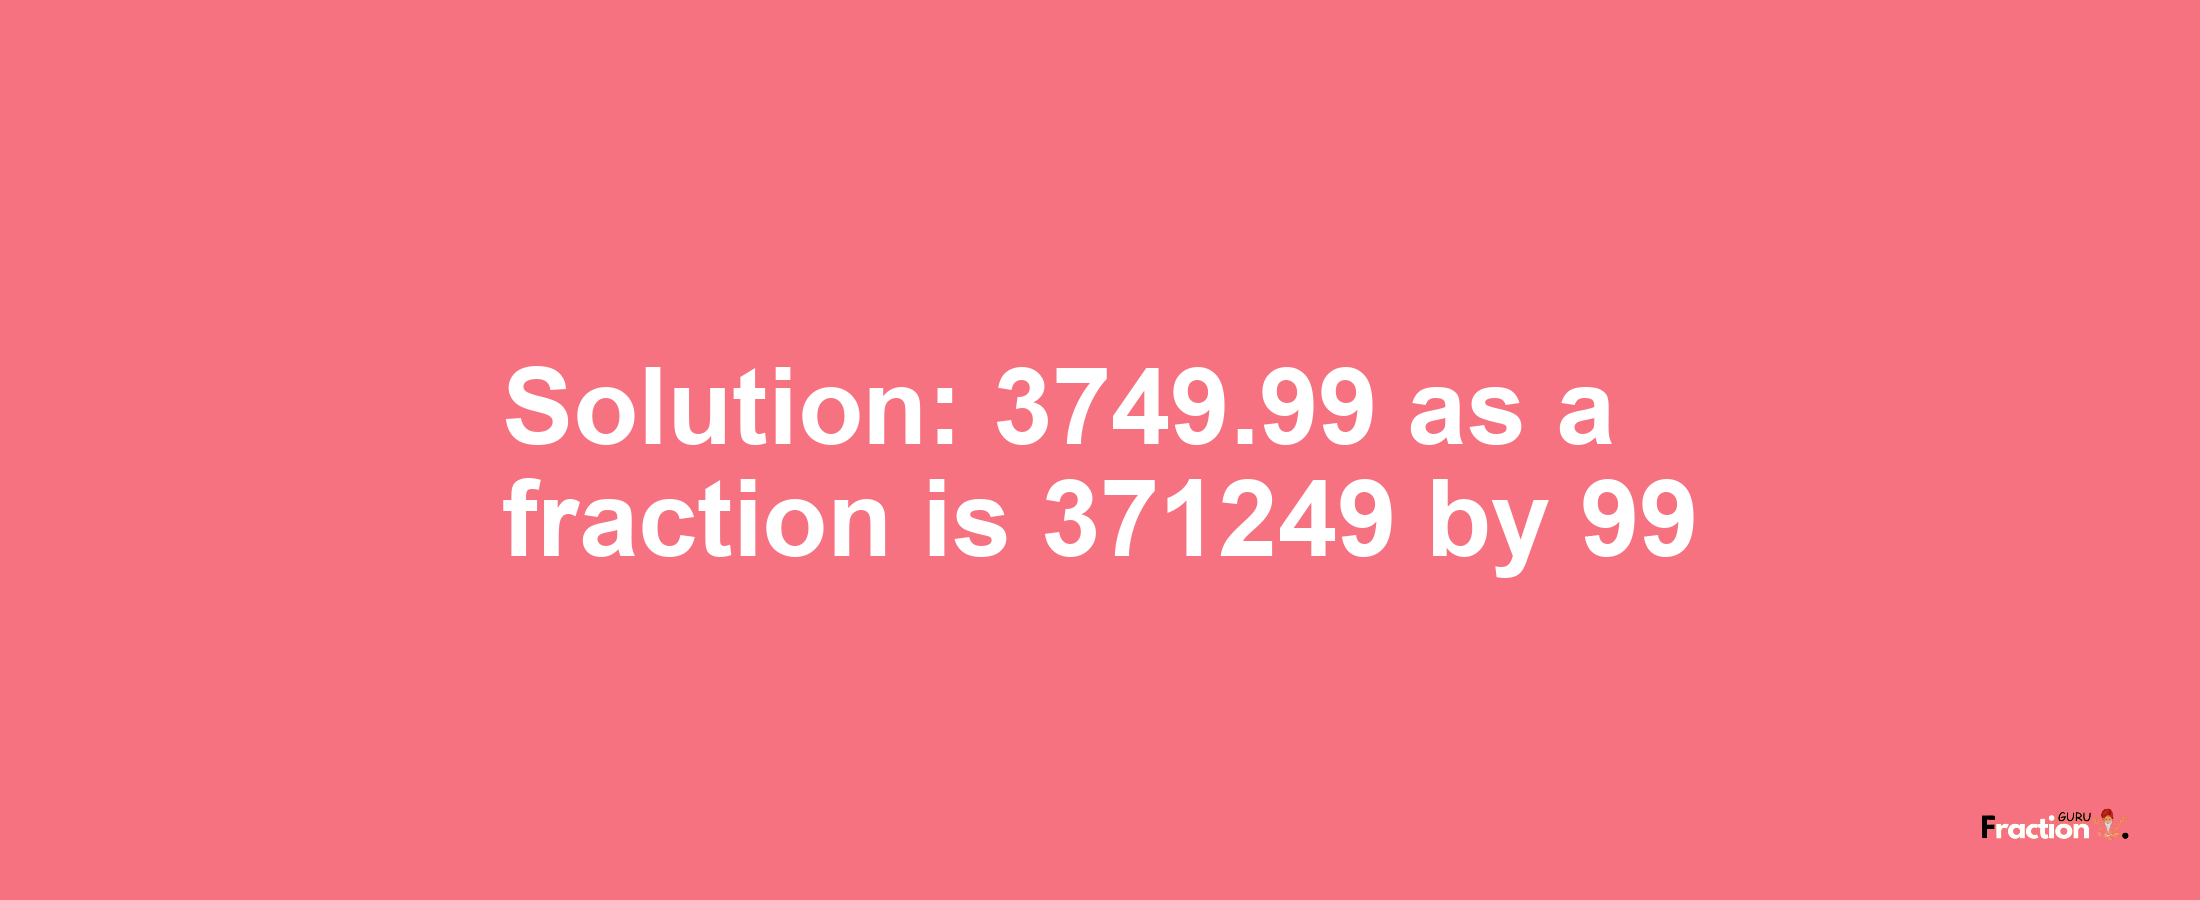 Solution:3749.99 as a fraction is 371249/99